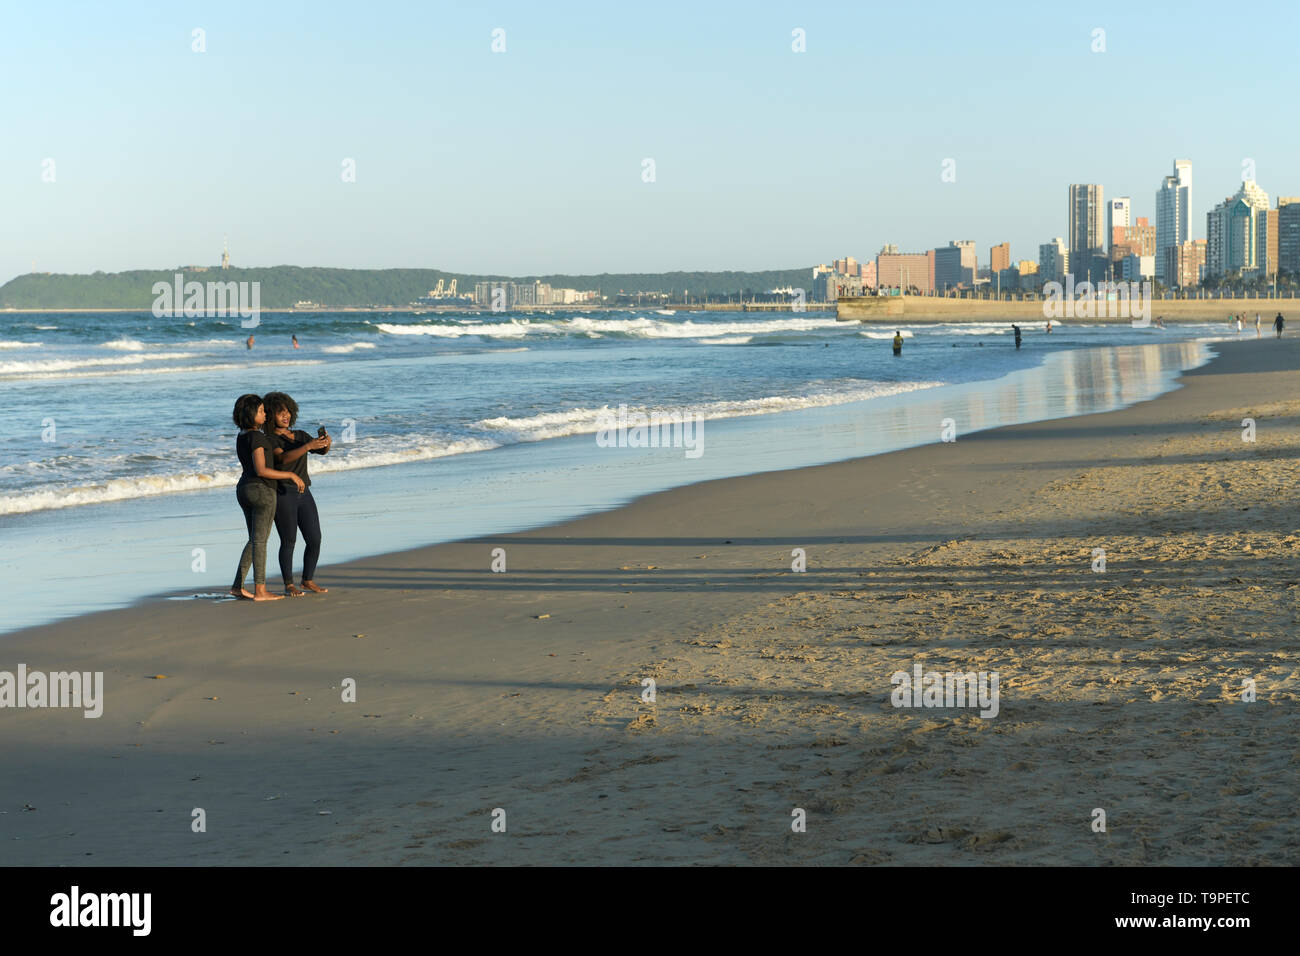 Two young adult women friends taking selfie with mobile phone, standing on beach, Durban, KwaZulu-Natal, South Africa, people, ethnic, landscape, city Stock Photo